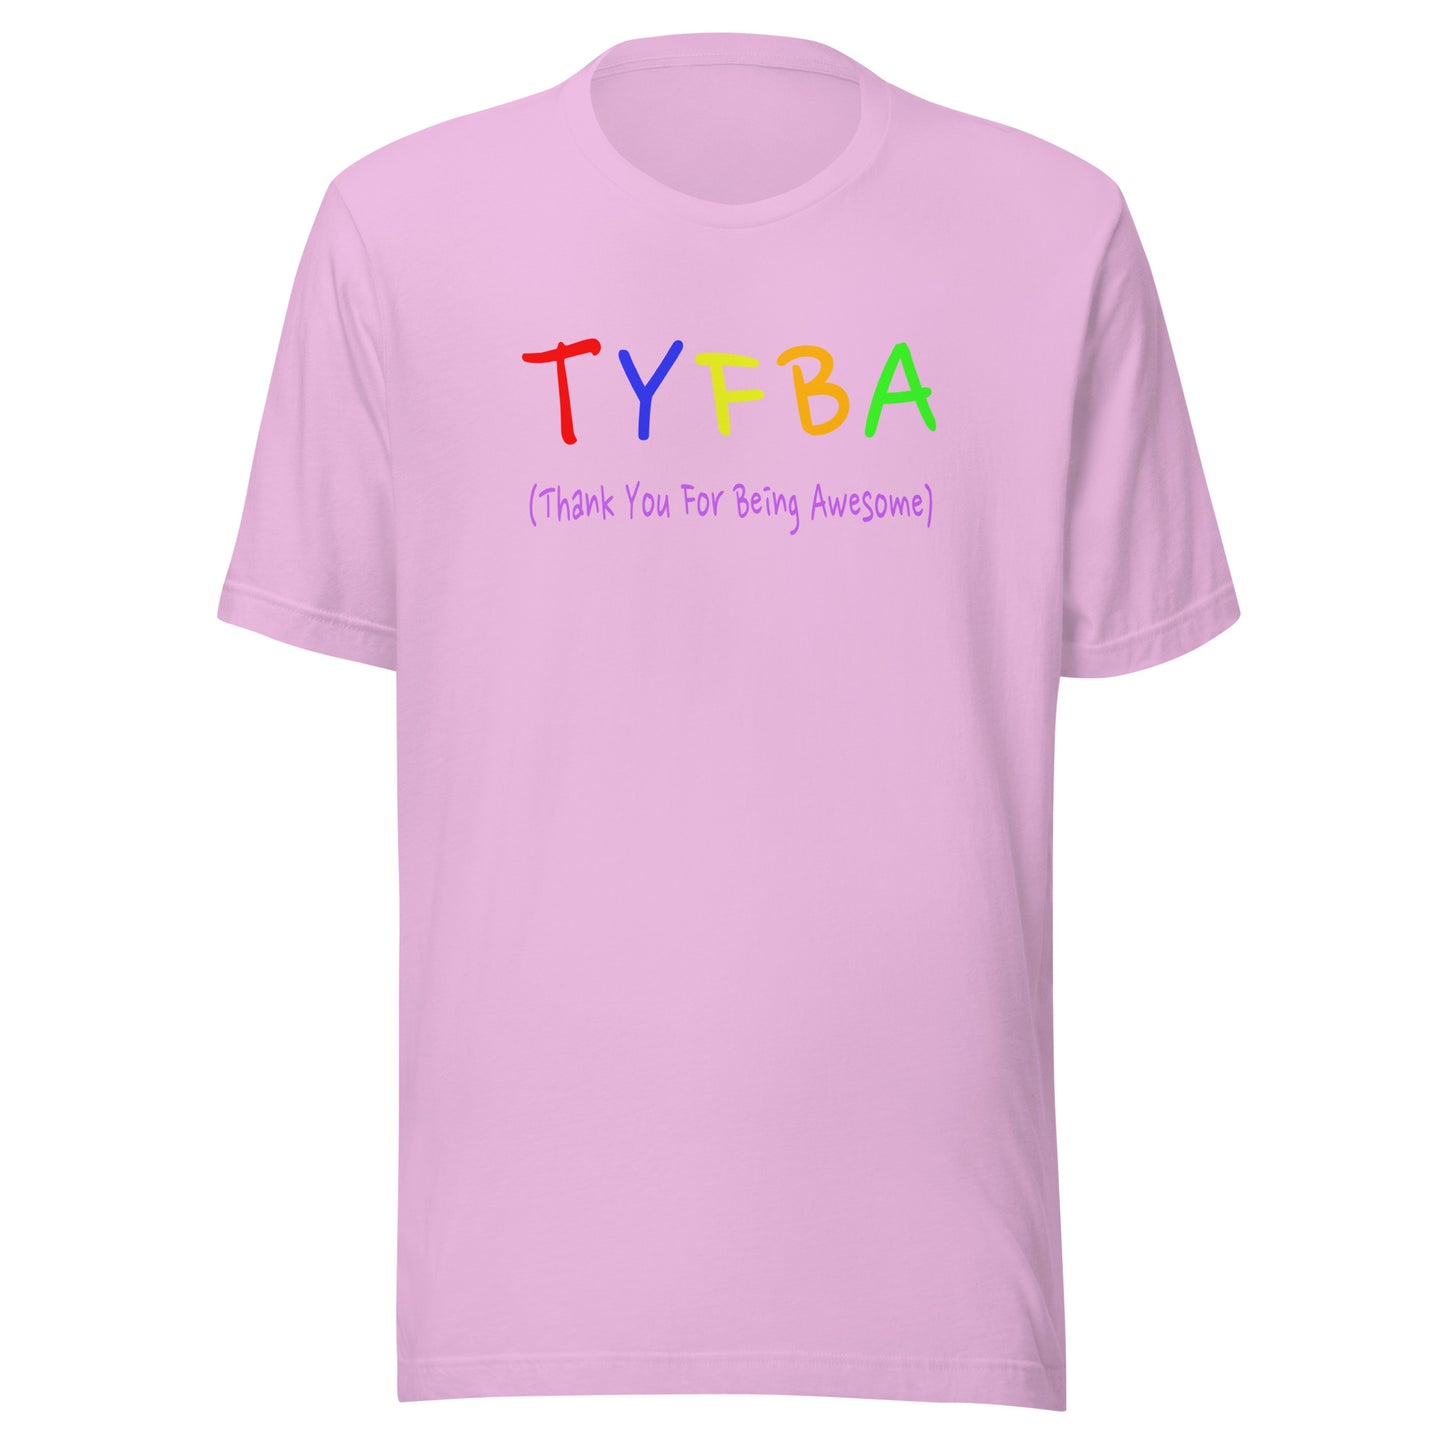 TYFBA: Thank You for Being Awesome Unisex t-shirt